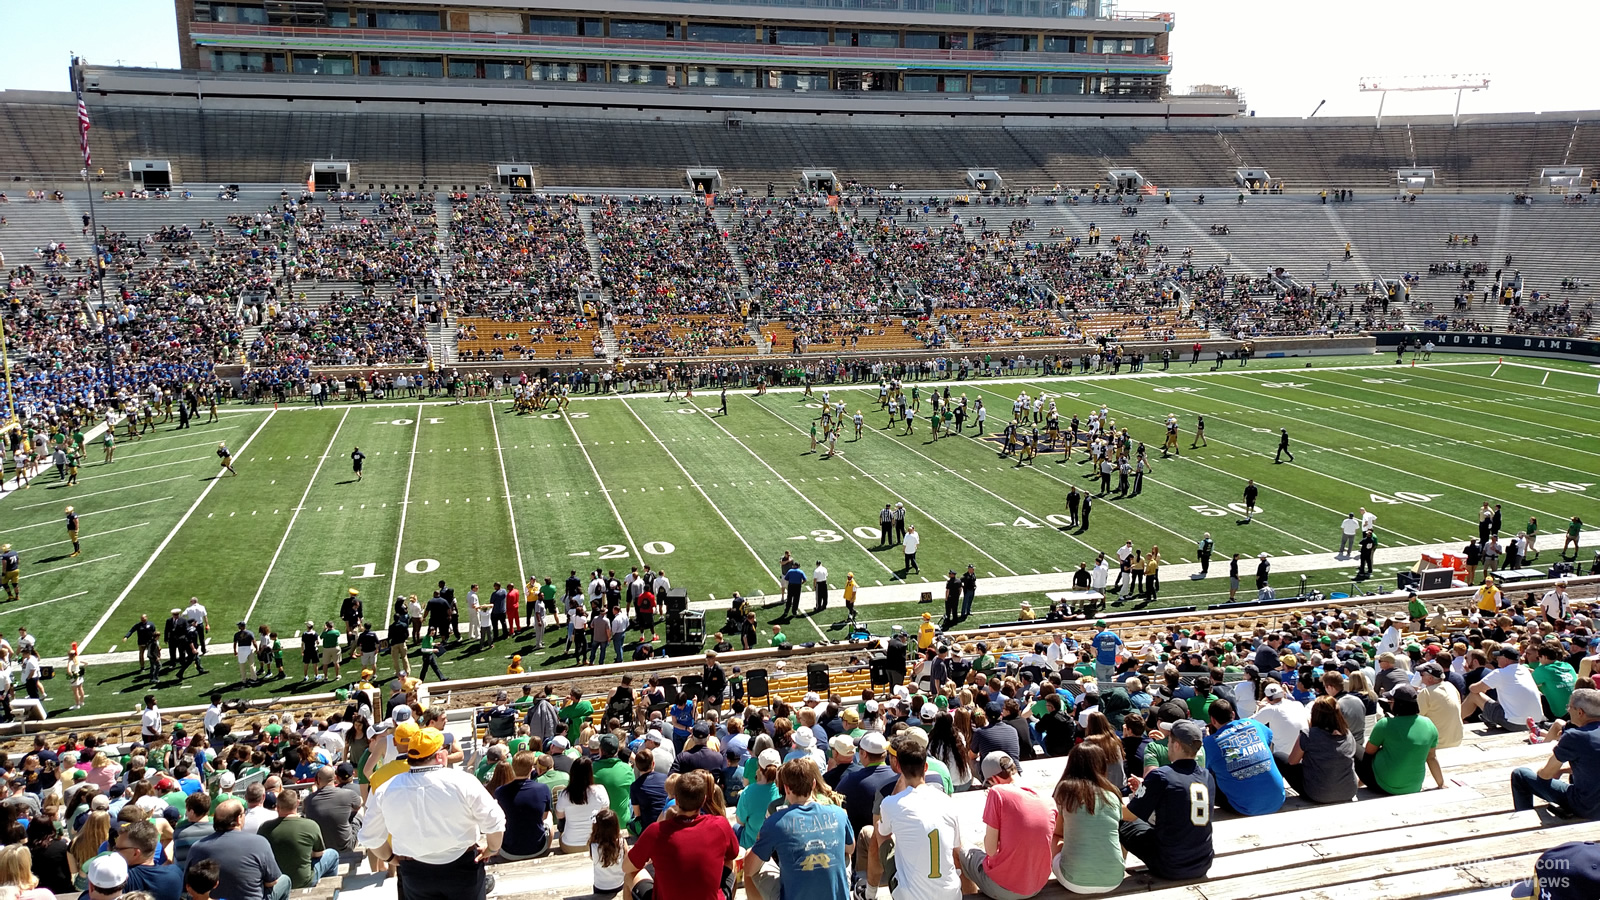 section 30, row 52 seat view  - notre dame stadium